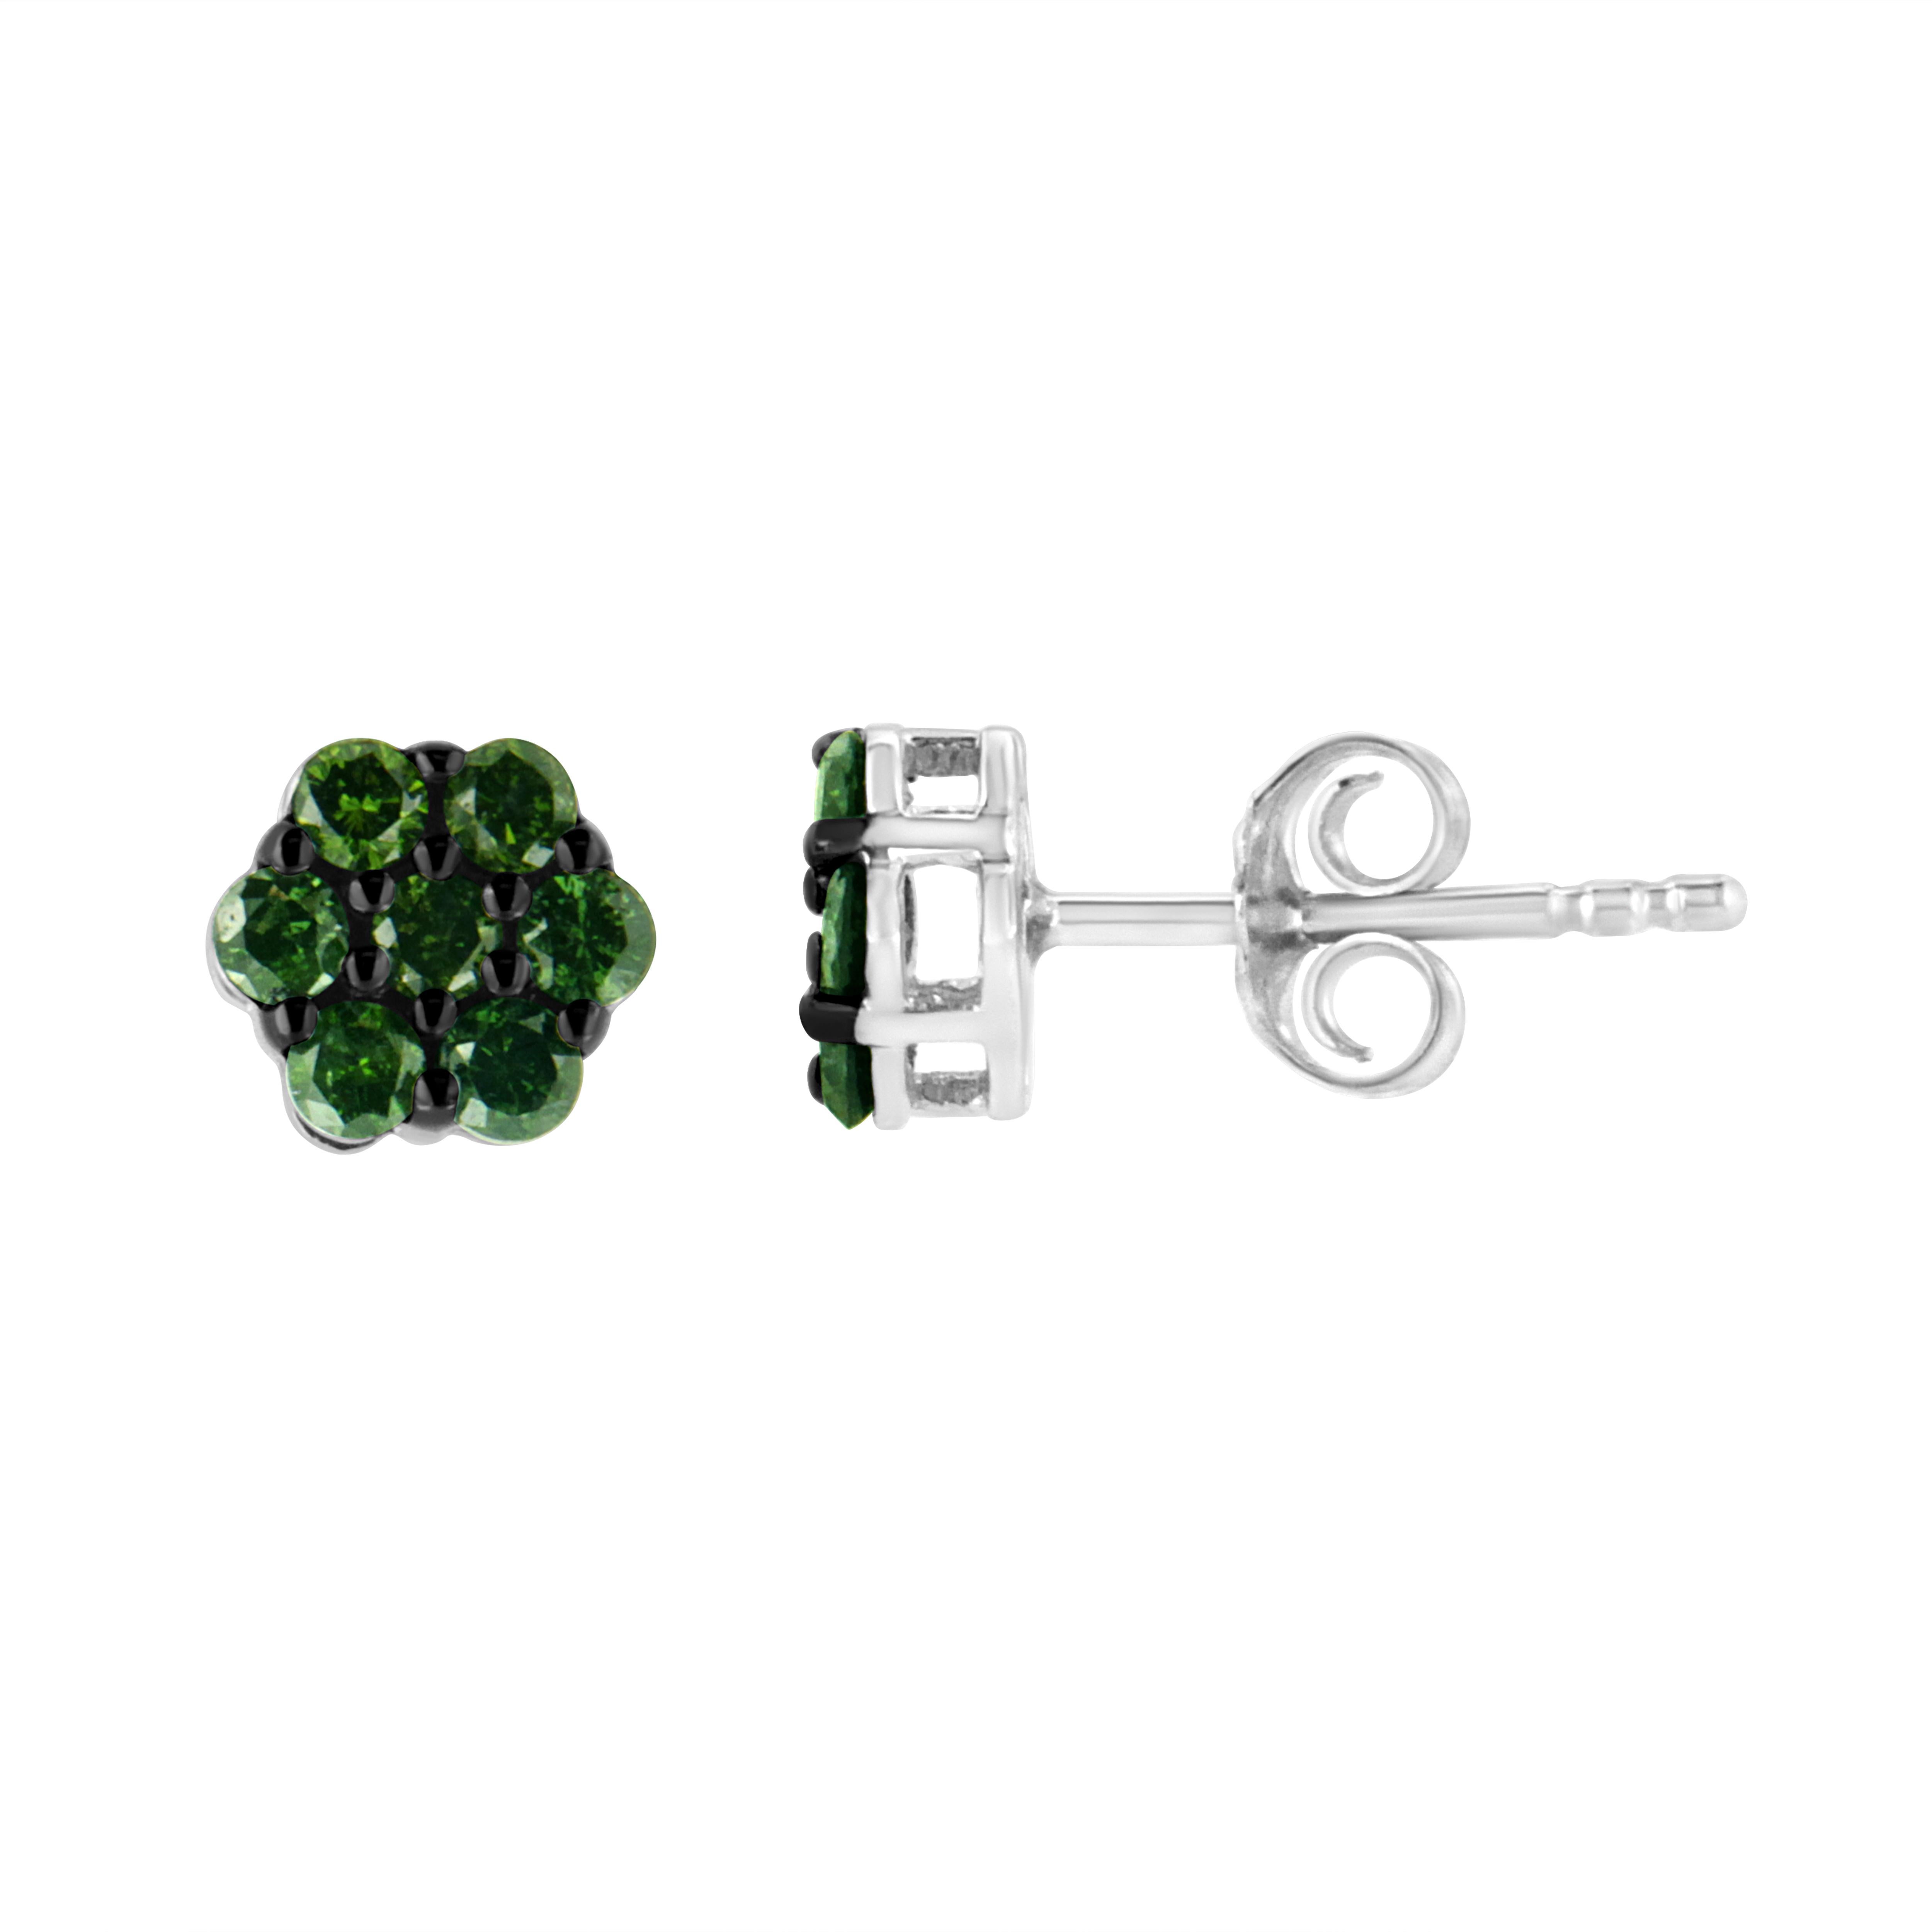 You will fall in love with these classic cluster stud earrings. A must have for any serious jewelry collection, these .925 sterling earrings boast an impressive 1/2 carat total weight of treated green diamonds with seven stones each. The earrings